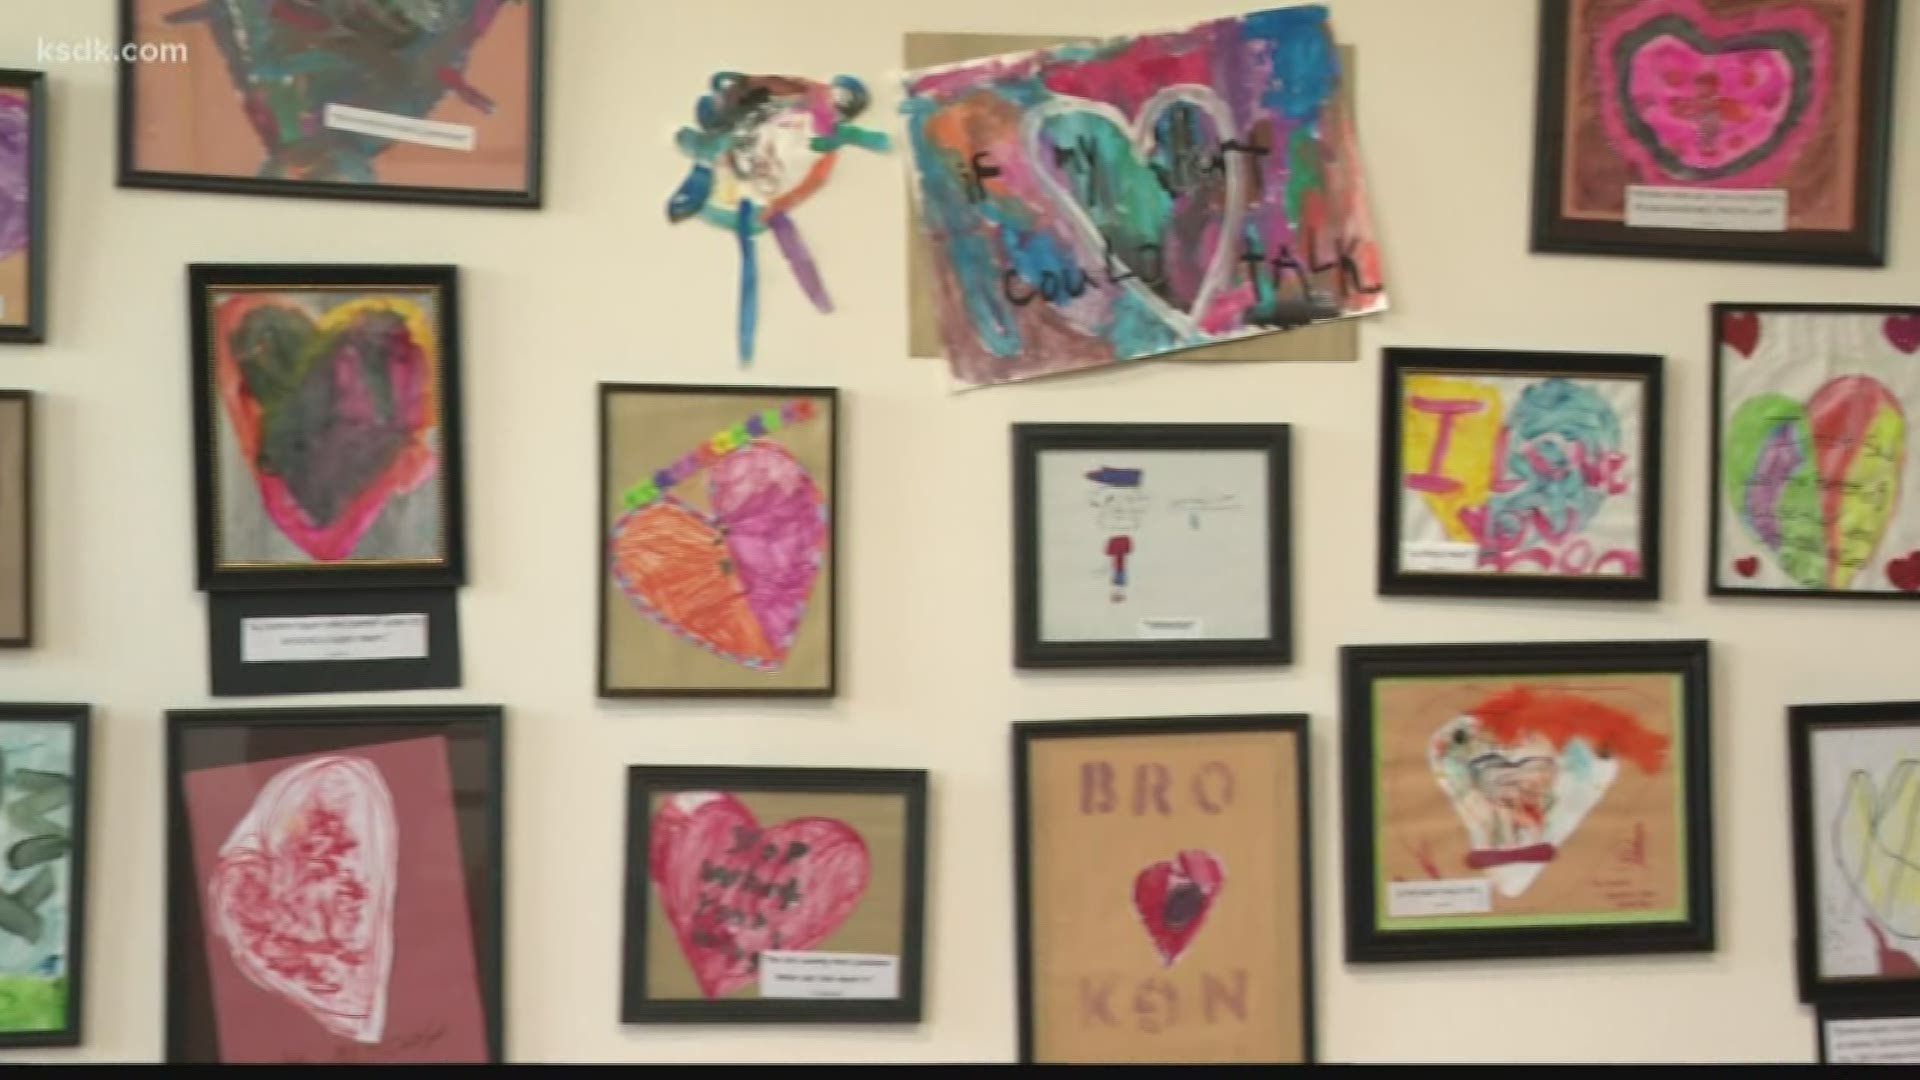 Inside the St. Louis Crisis Nursery, there is a wall full of broken hearts -- and drawings that leave you speechless.